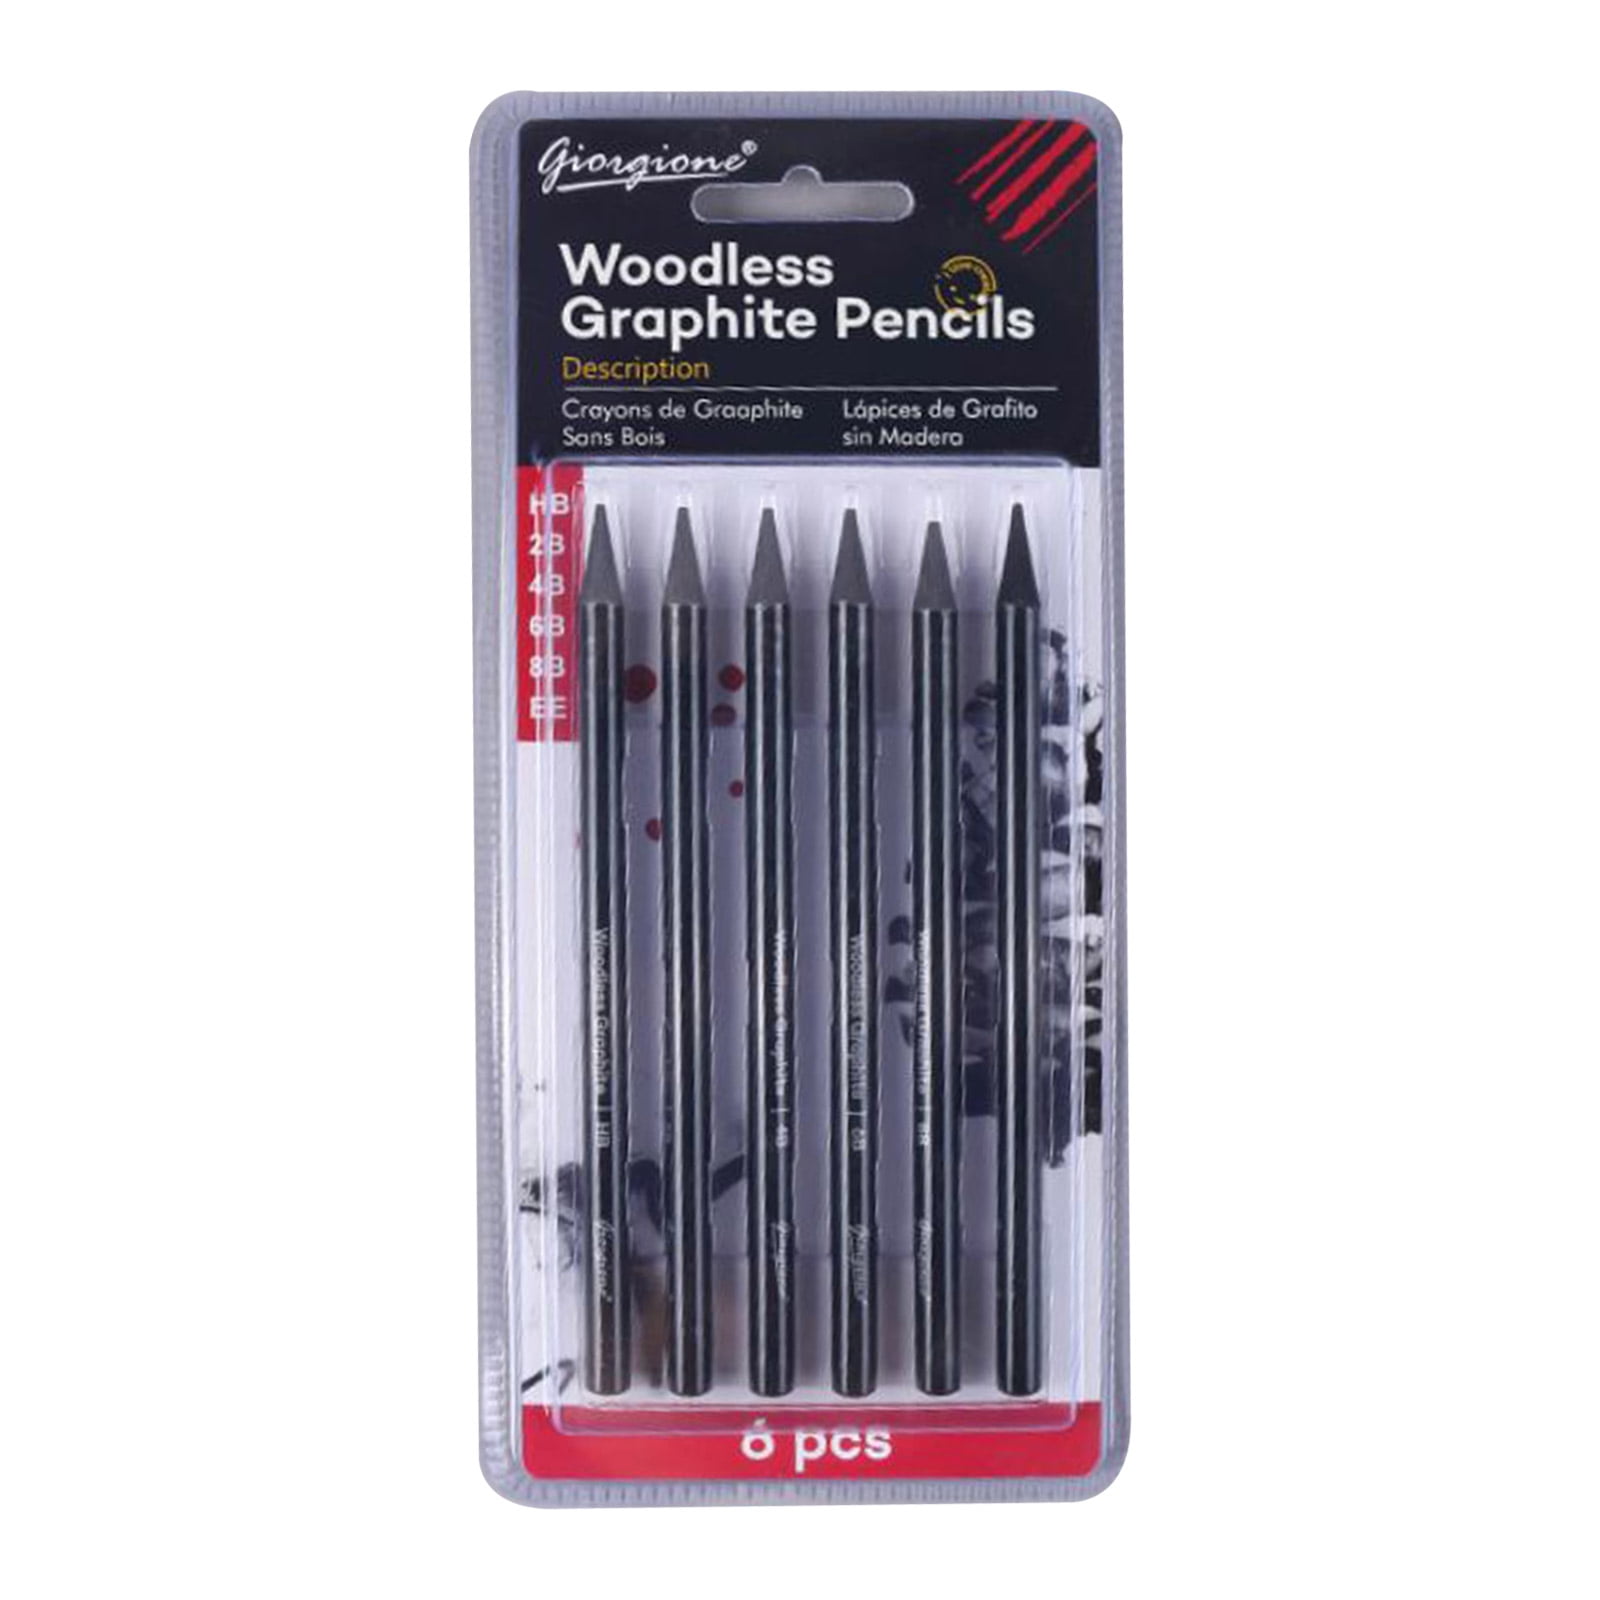 ThePortraitArt Artist Woodless Pure Charcoal Pencils - Ultra Soft and Dark  – 6pc Set Equivalent to 25+ Regular Pencils – Smooth Consistency on All